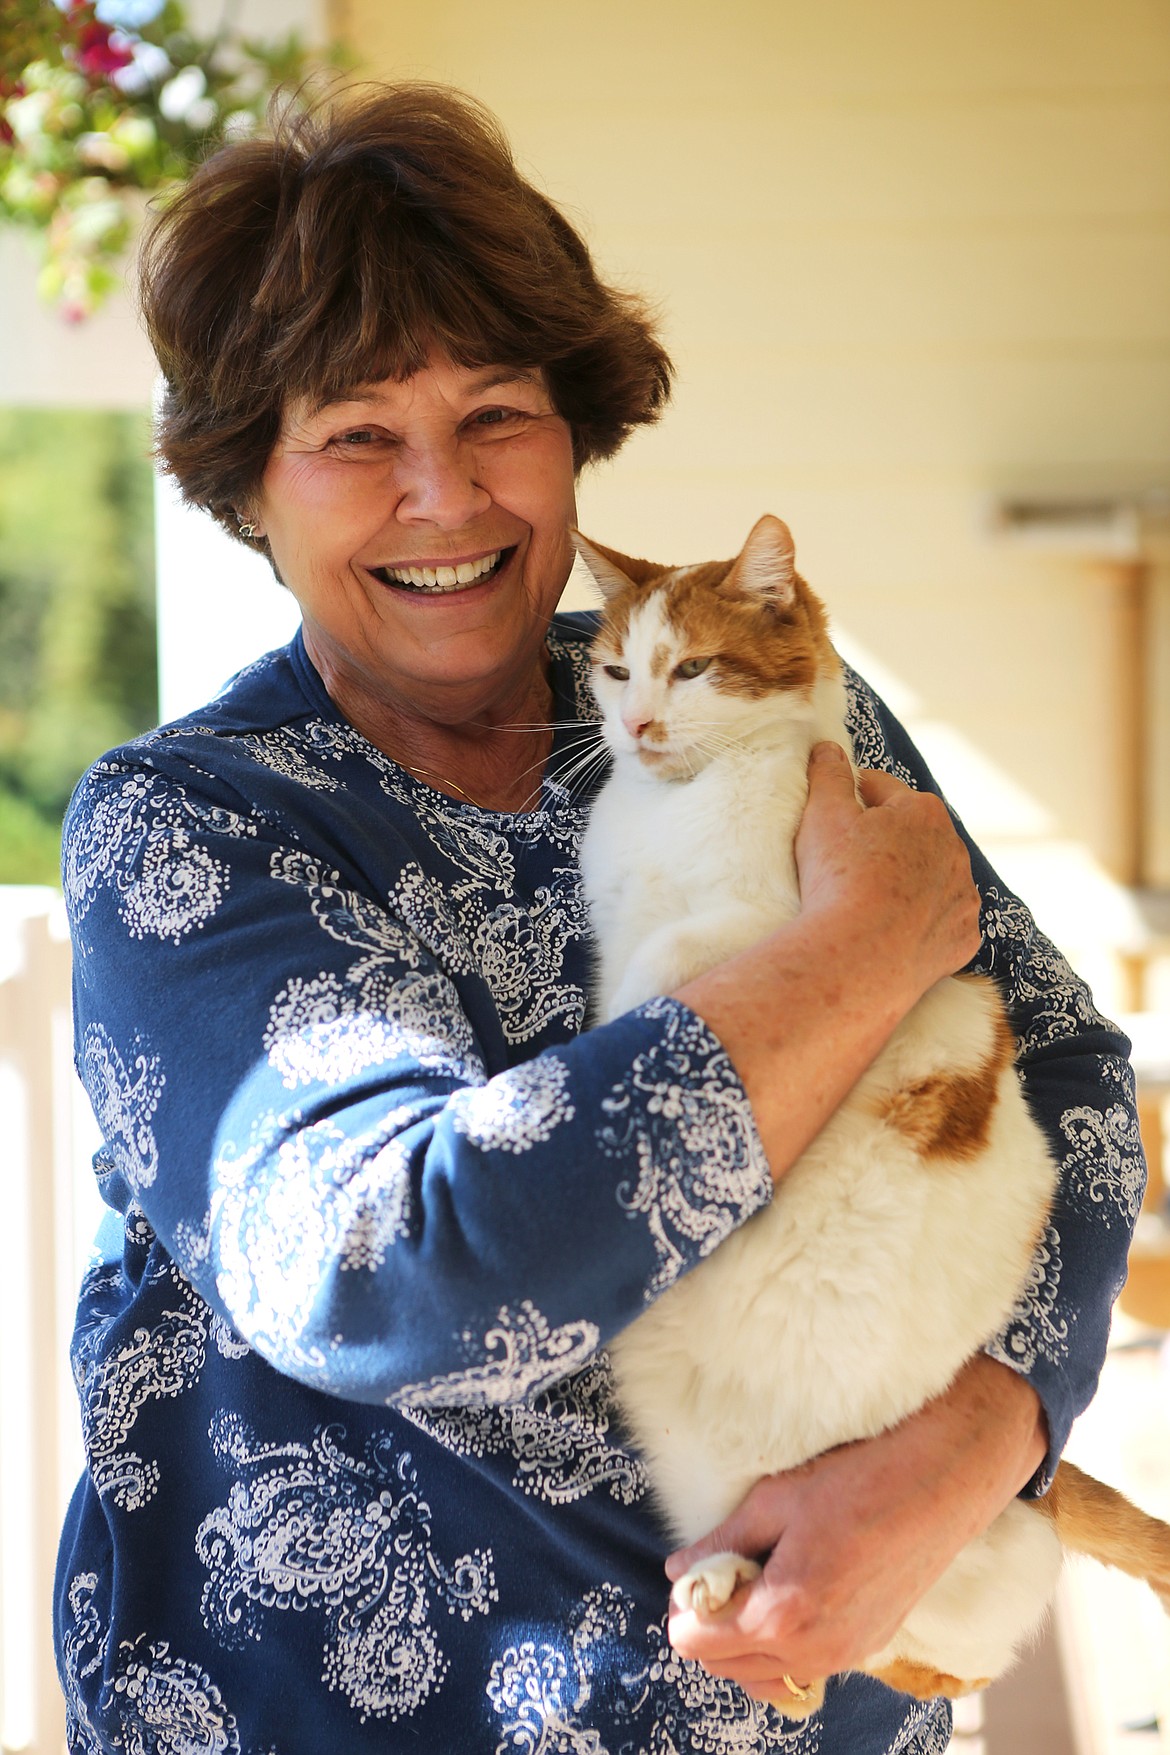 Darcy Albert, founder of Kitty MOM's Rescue is pictured with one of her cats the afternoon of Sept. 24 at her Kalispell home. 
Mackenzie Reiss/Daily Inter Lake